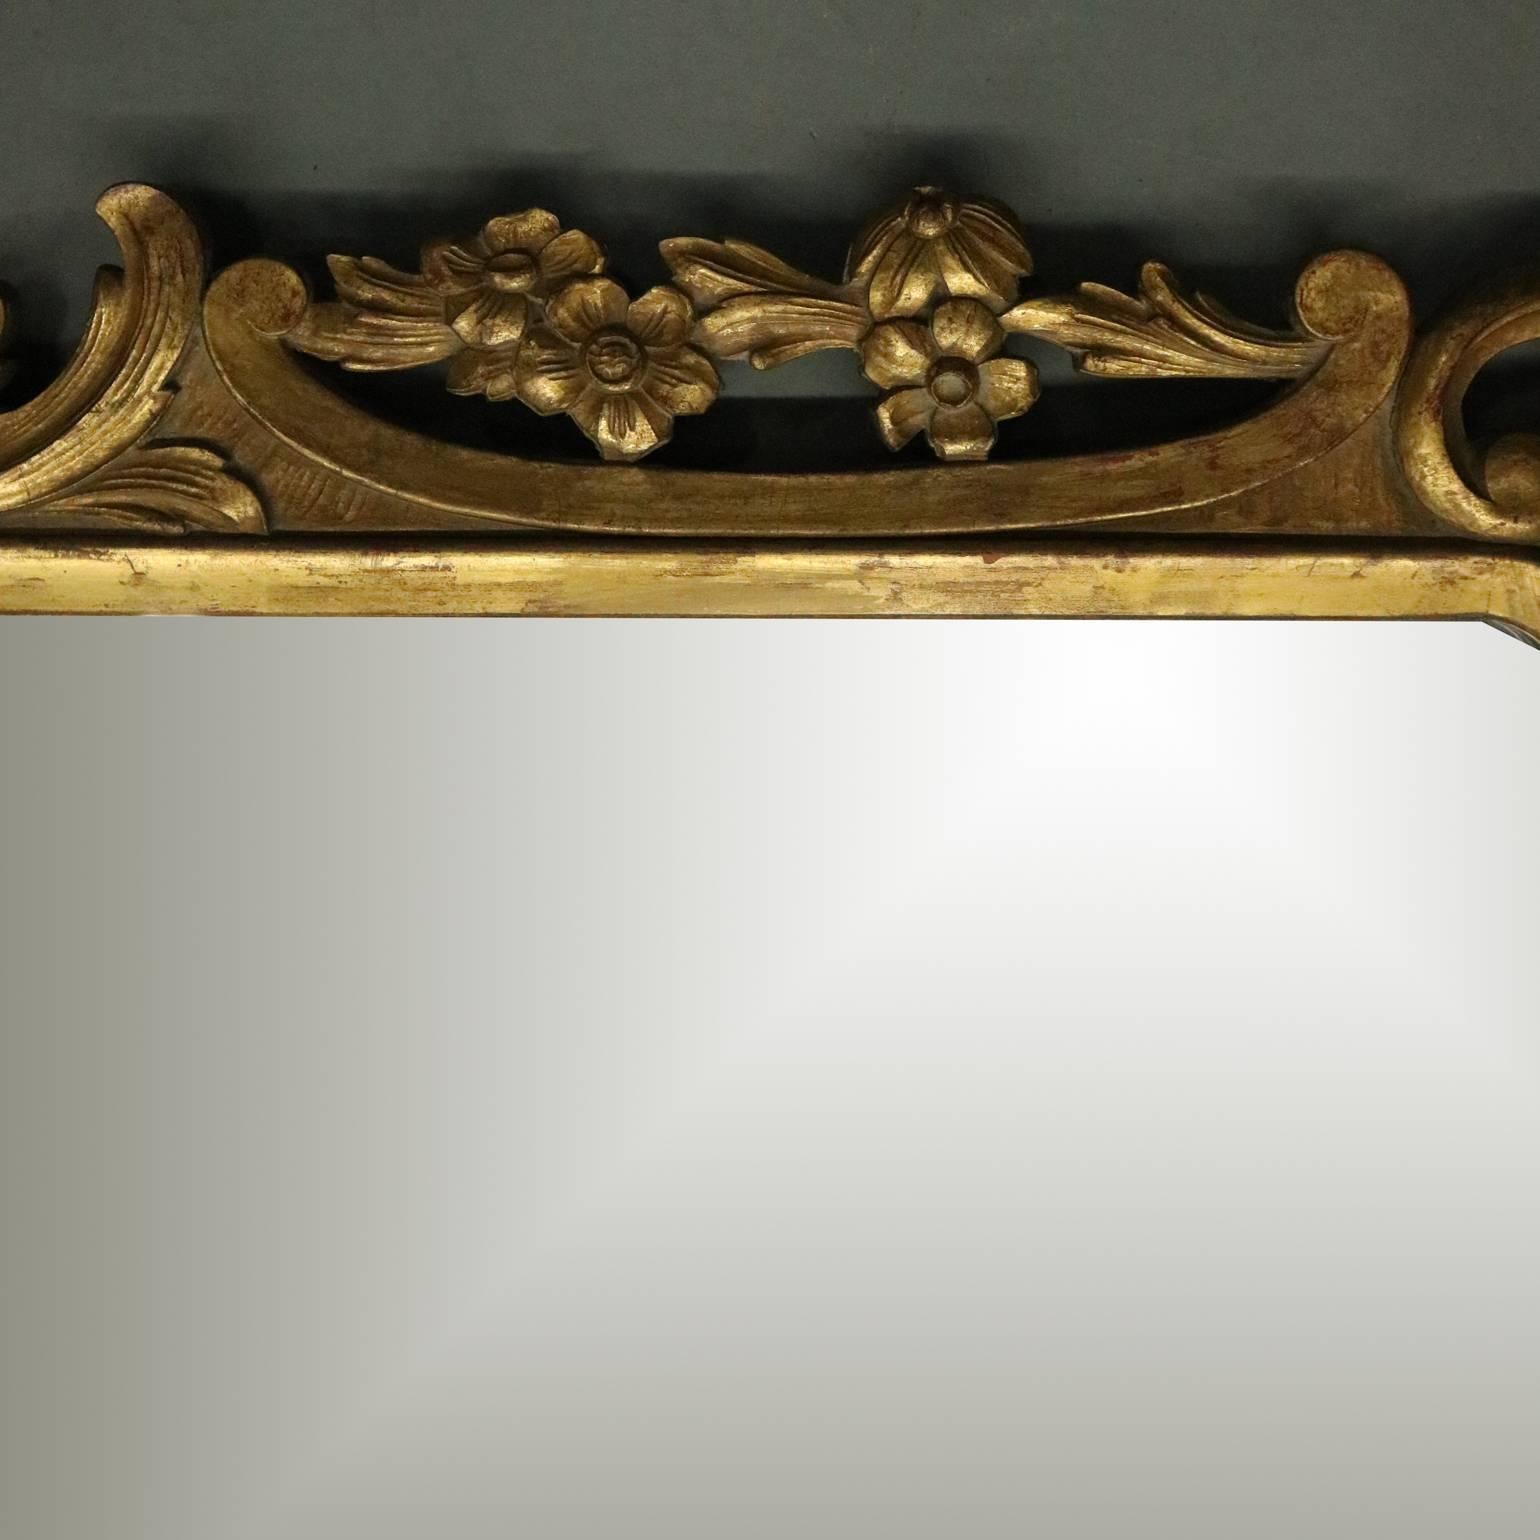 Antique French gold giltwood wall mirror features pierced surround with scroll, foliate and gadrooning, circa 1920

Measures - 45